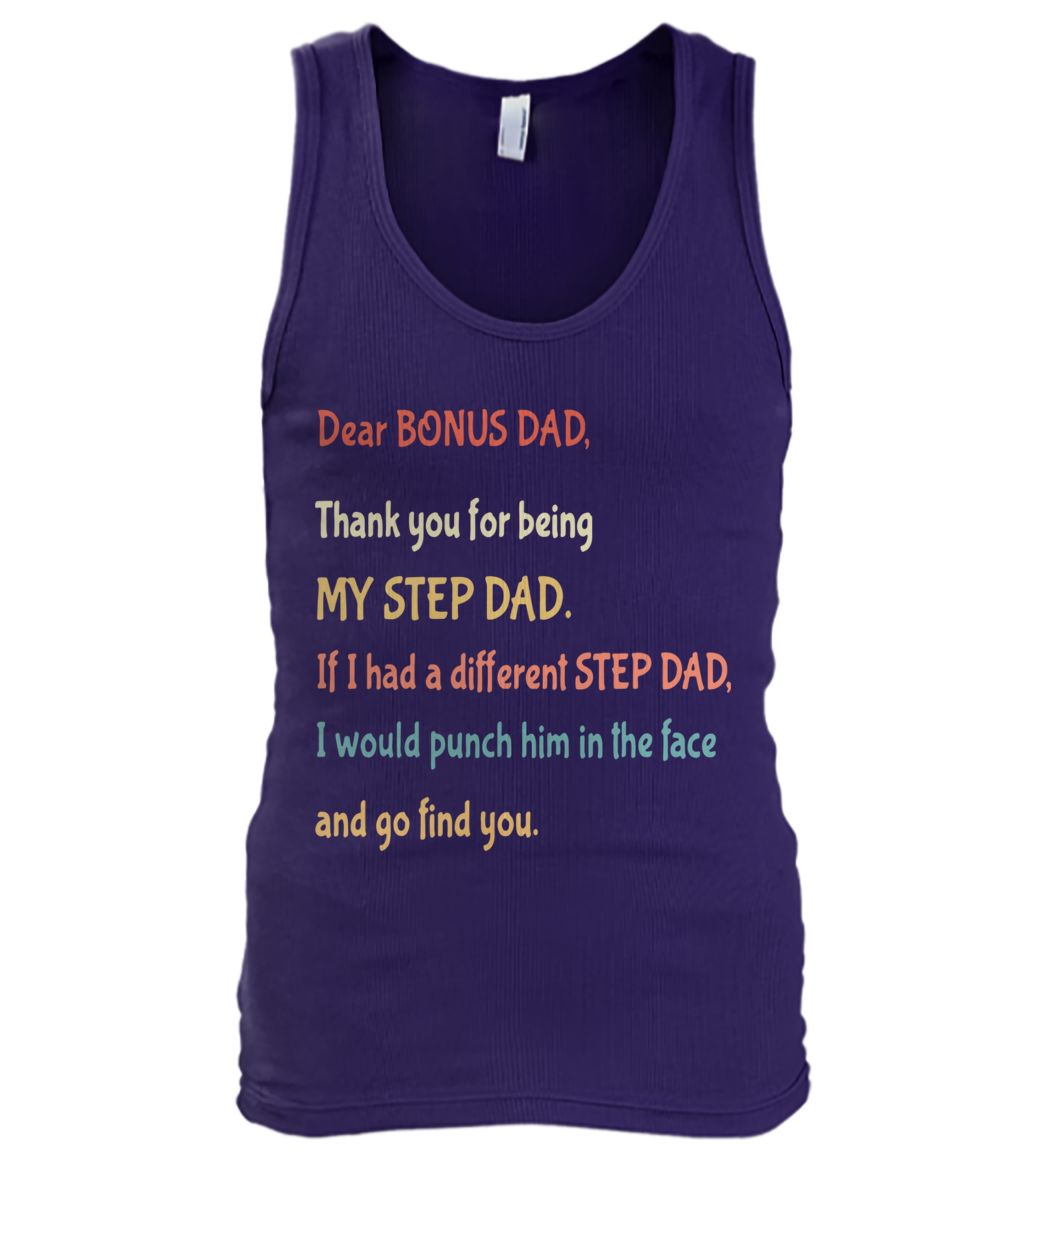 Dear bonus dad thank you for being my step dad men's tank top